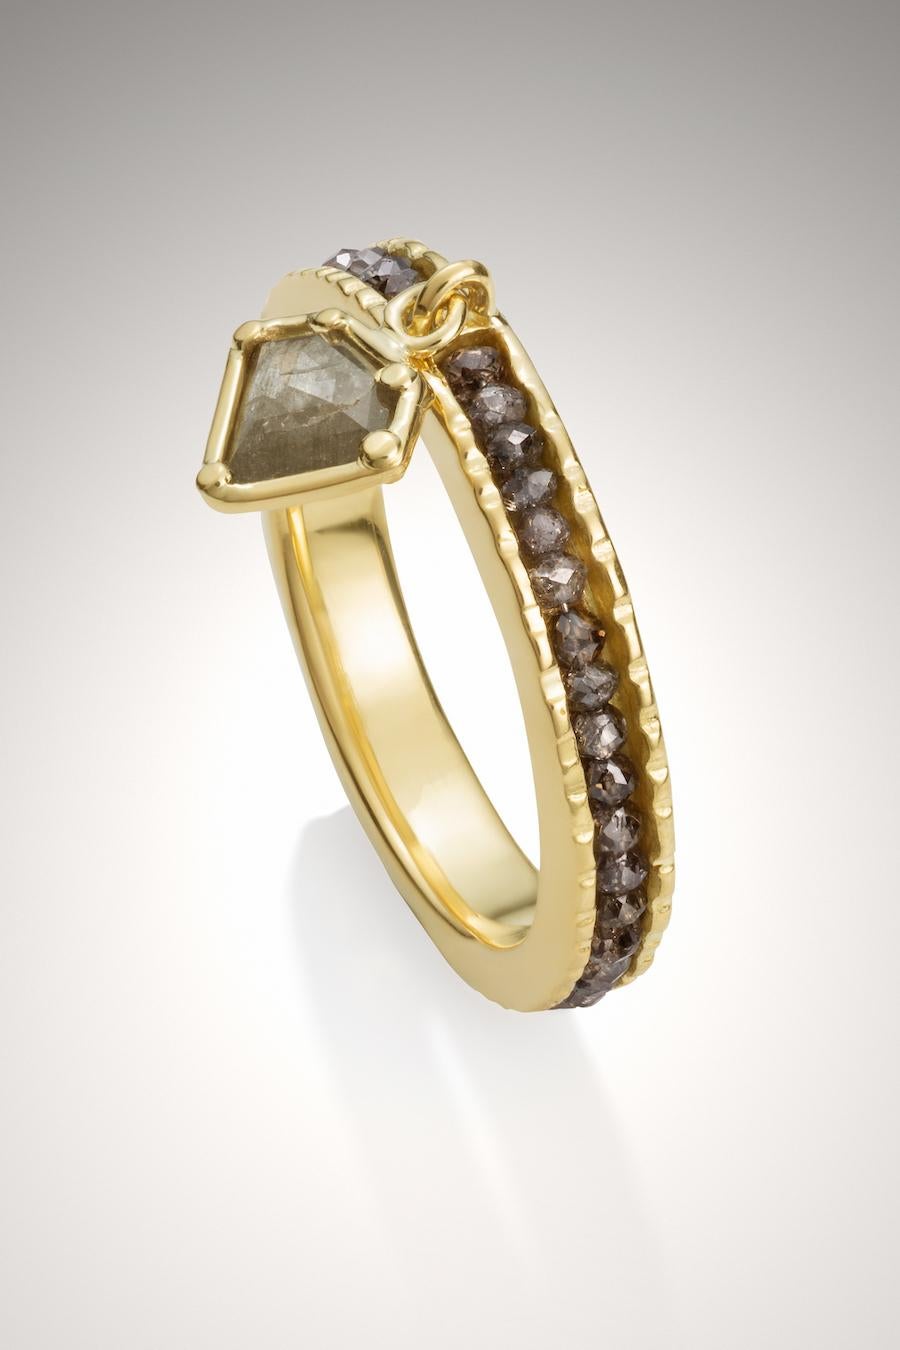 18KY Ring with Brown Diamonds and Brown Diamond Charm is a lovely charming ring, with a sweet little dangling Diamond charm.  The warmth of the Brown Diamonds blend well with the warmth of the 18K yellow gold.  The Brown Diamond charm is on a link